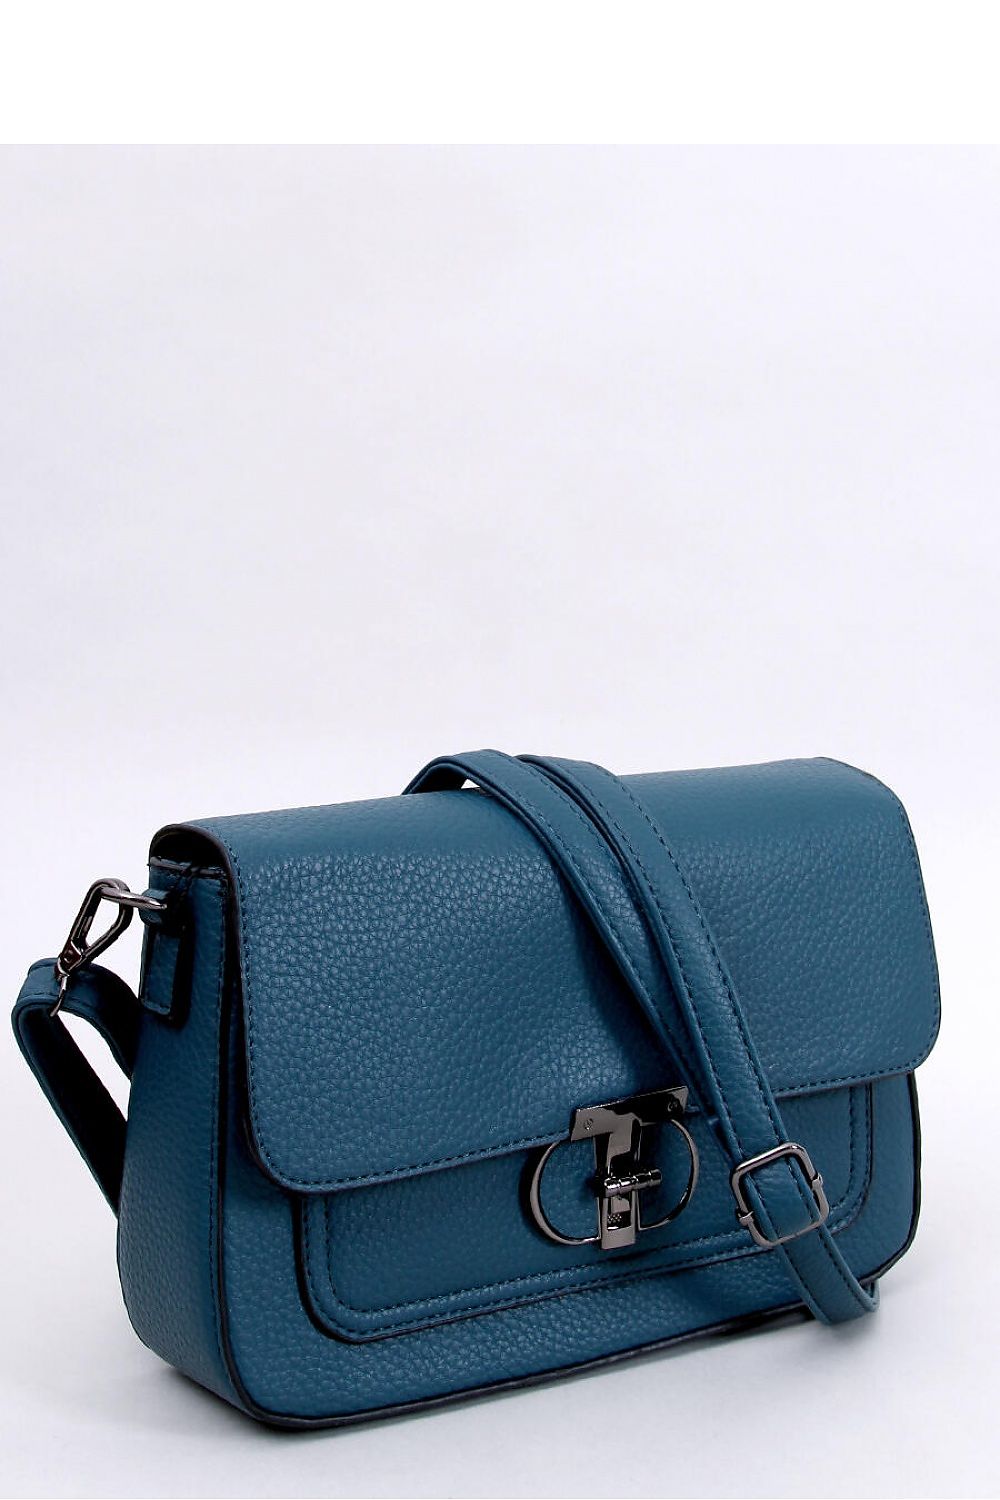 Bluw messenger bag stylish clasp with a flap